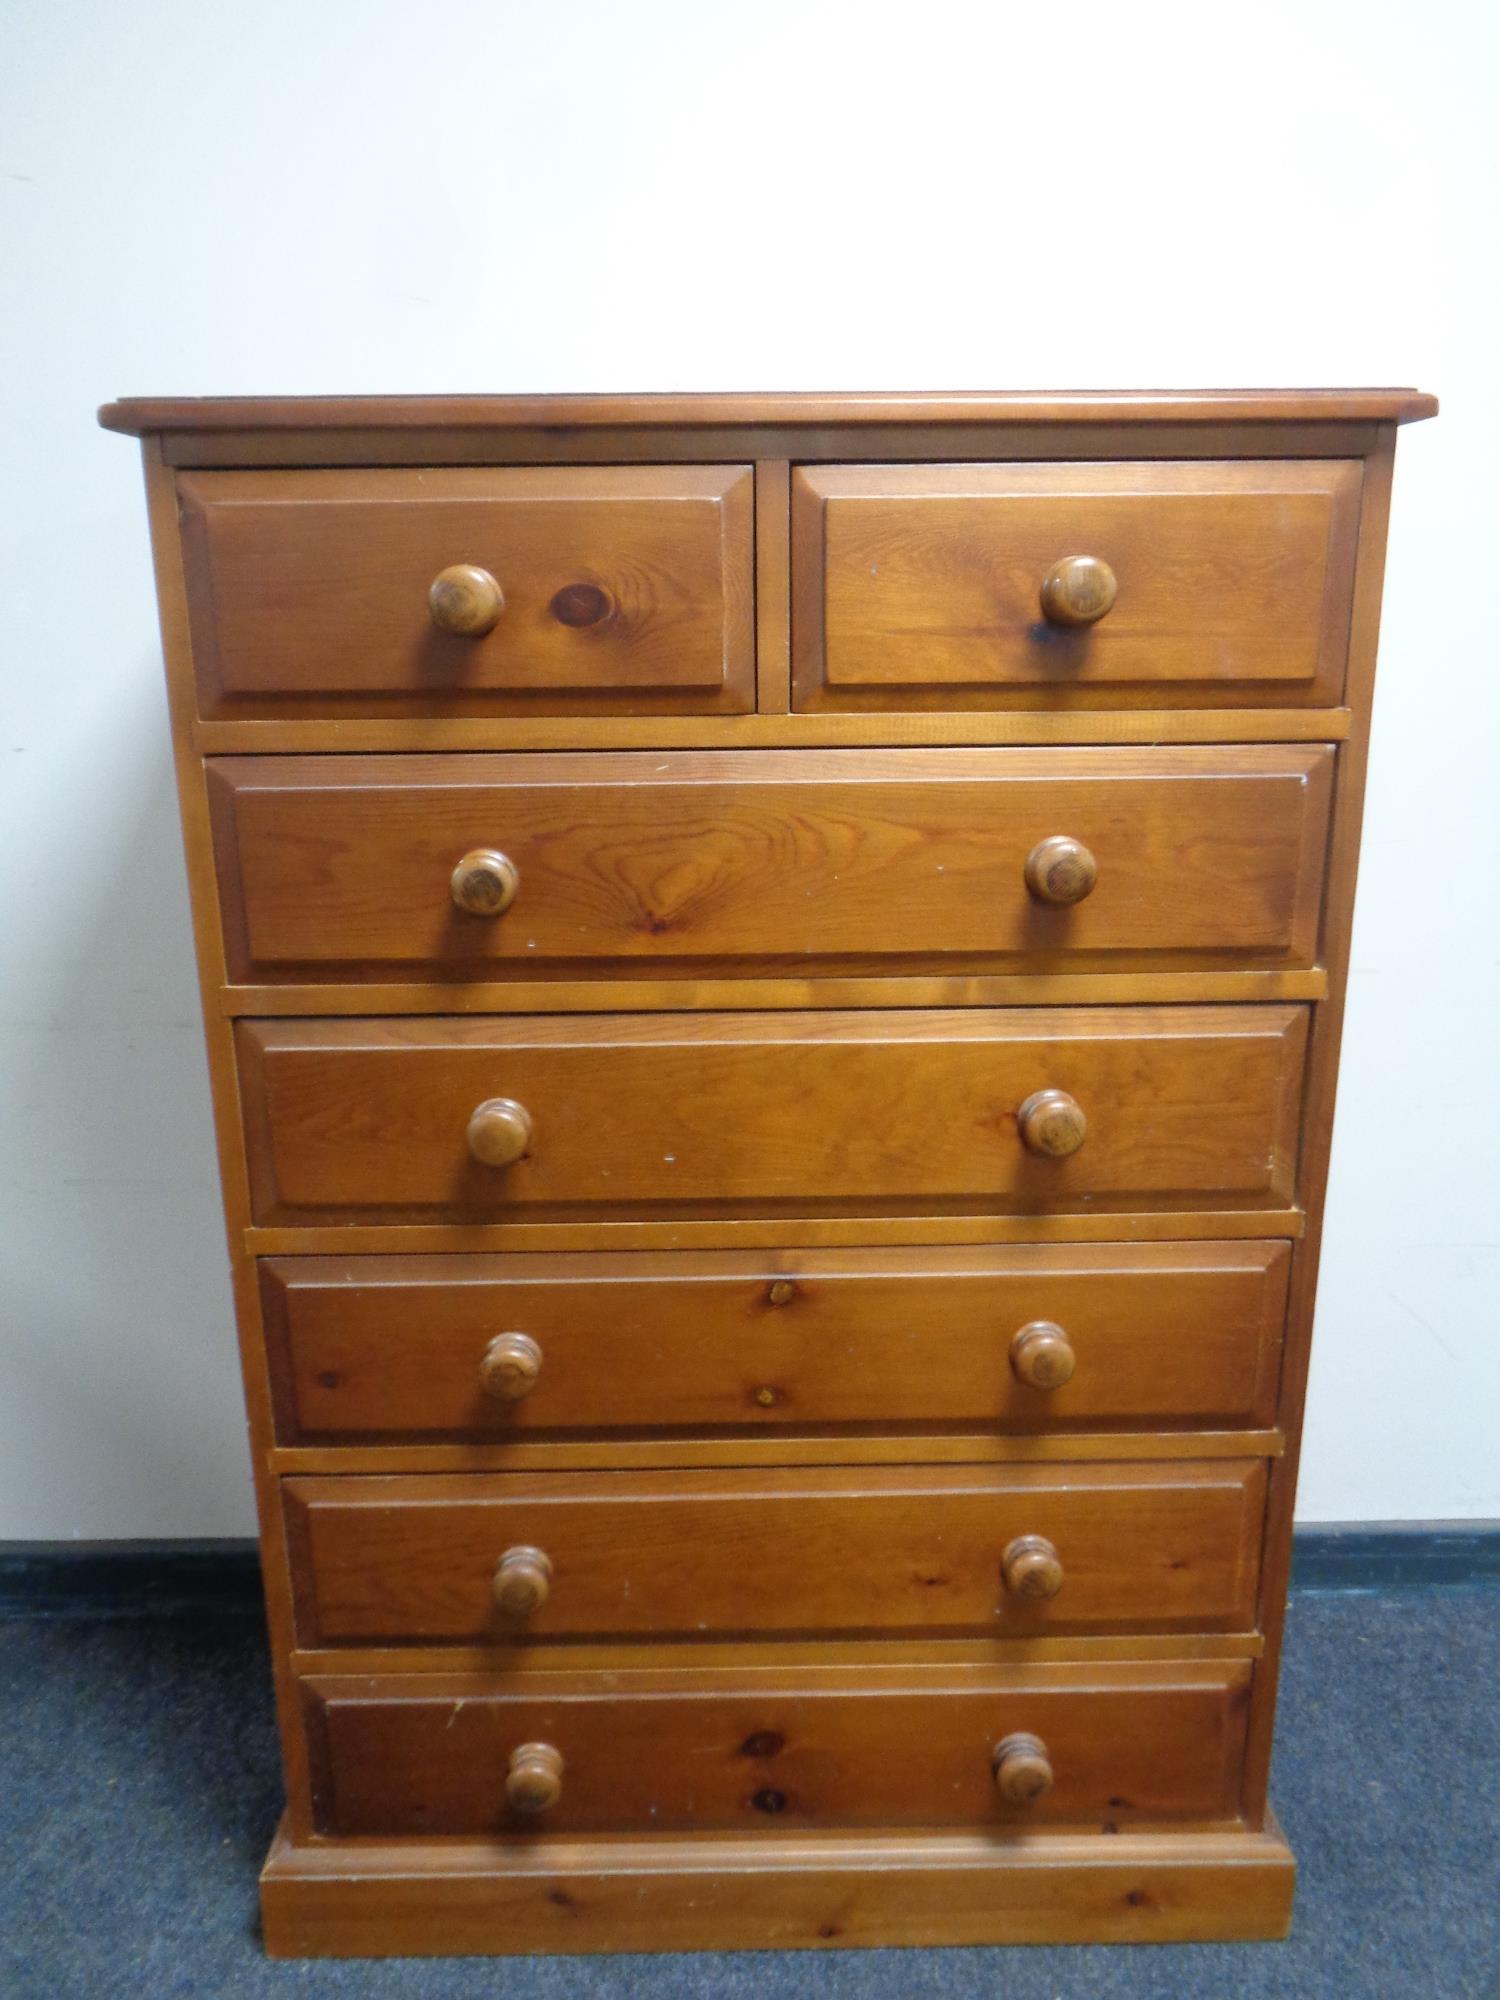 A pine chest of seven drawers